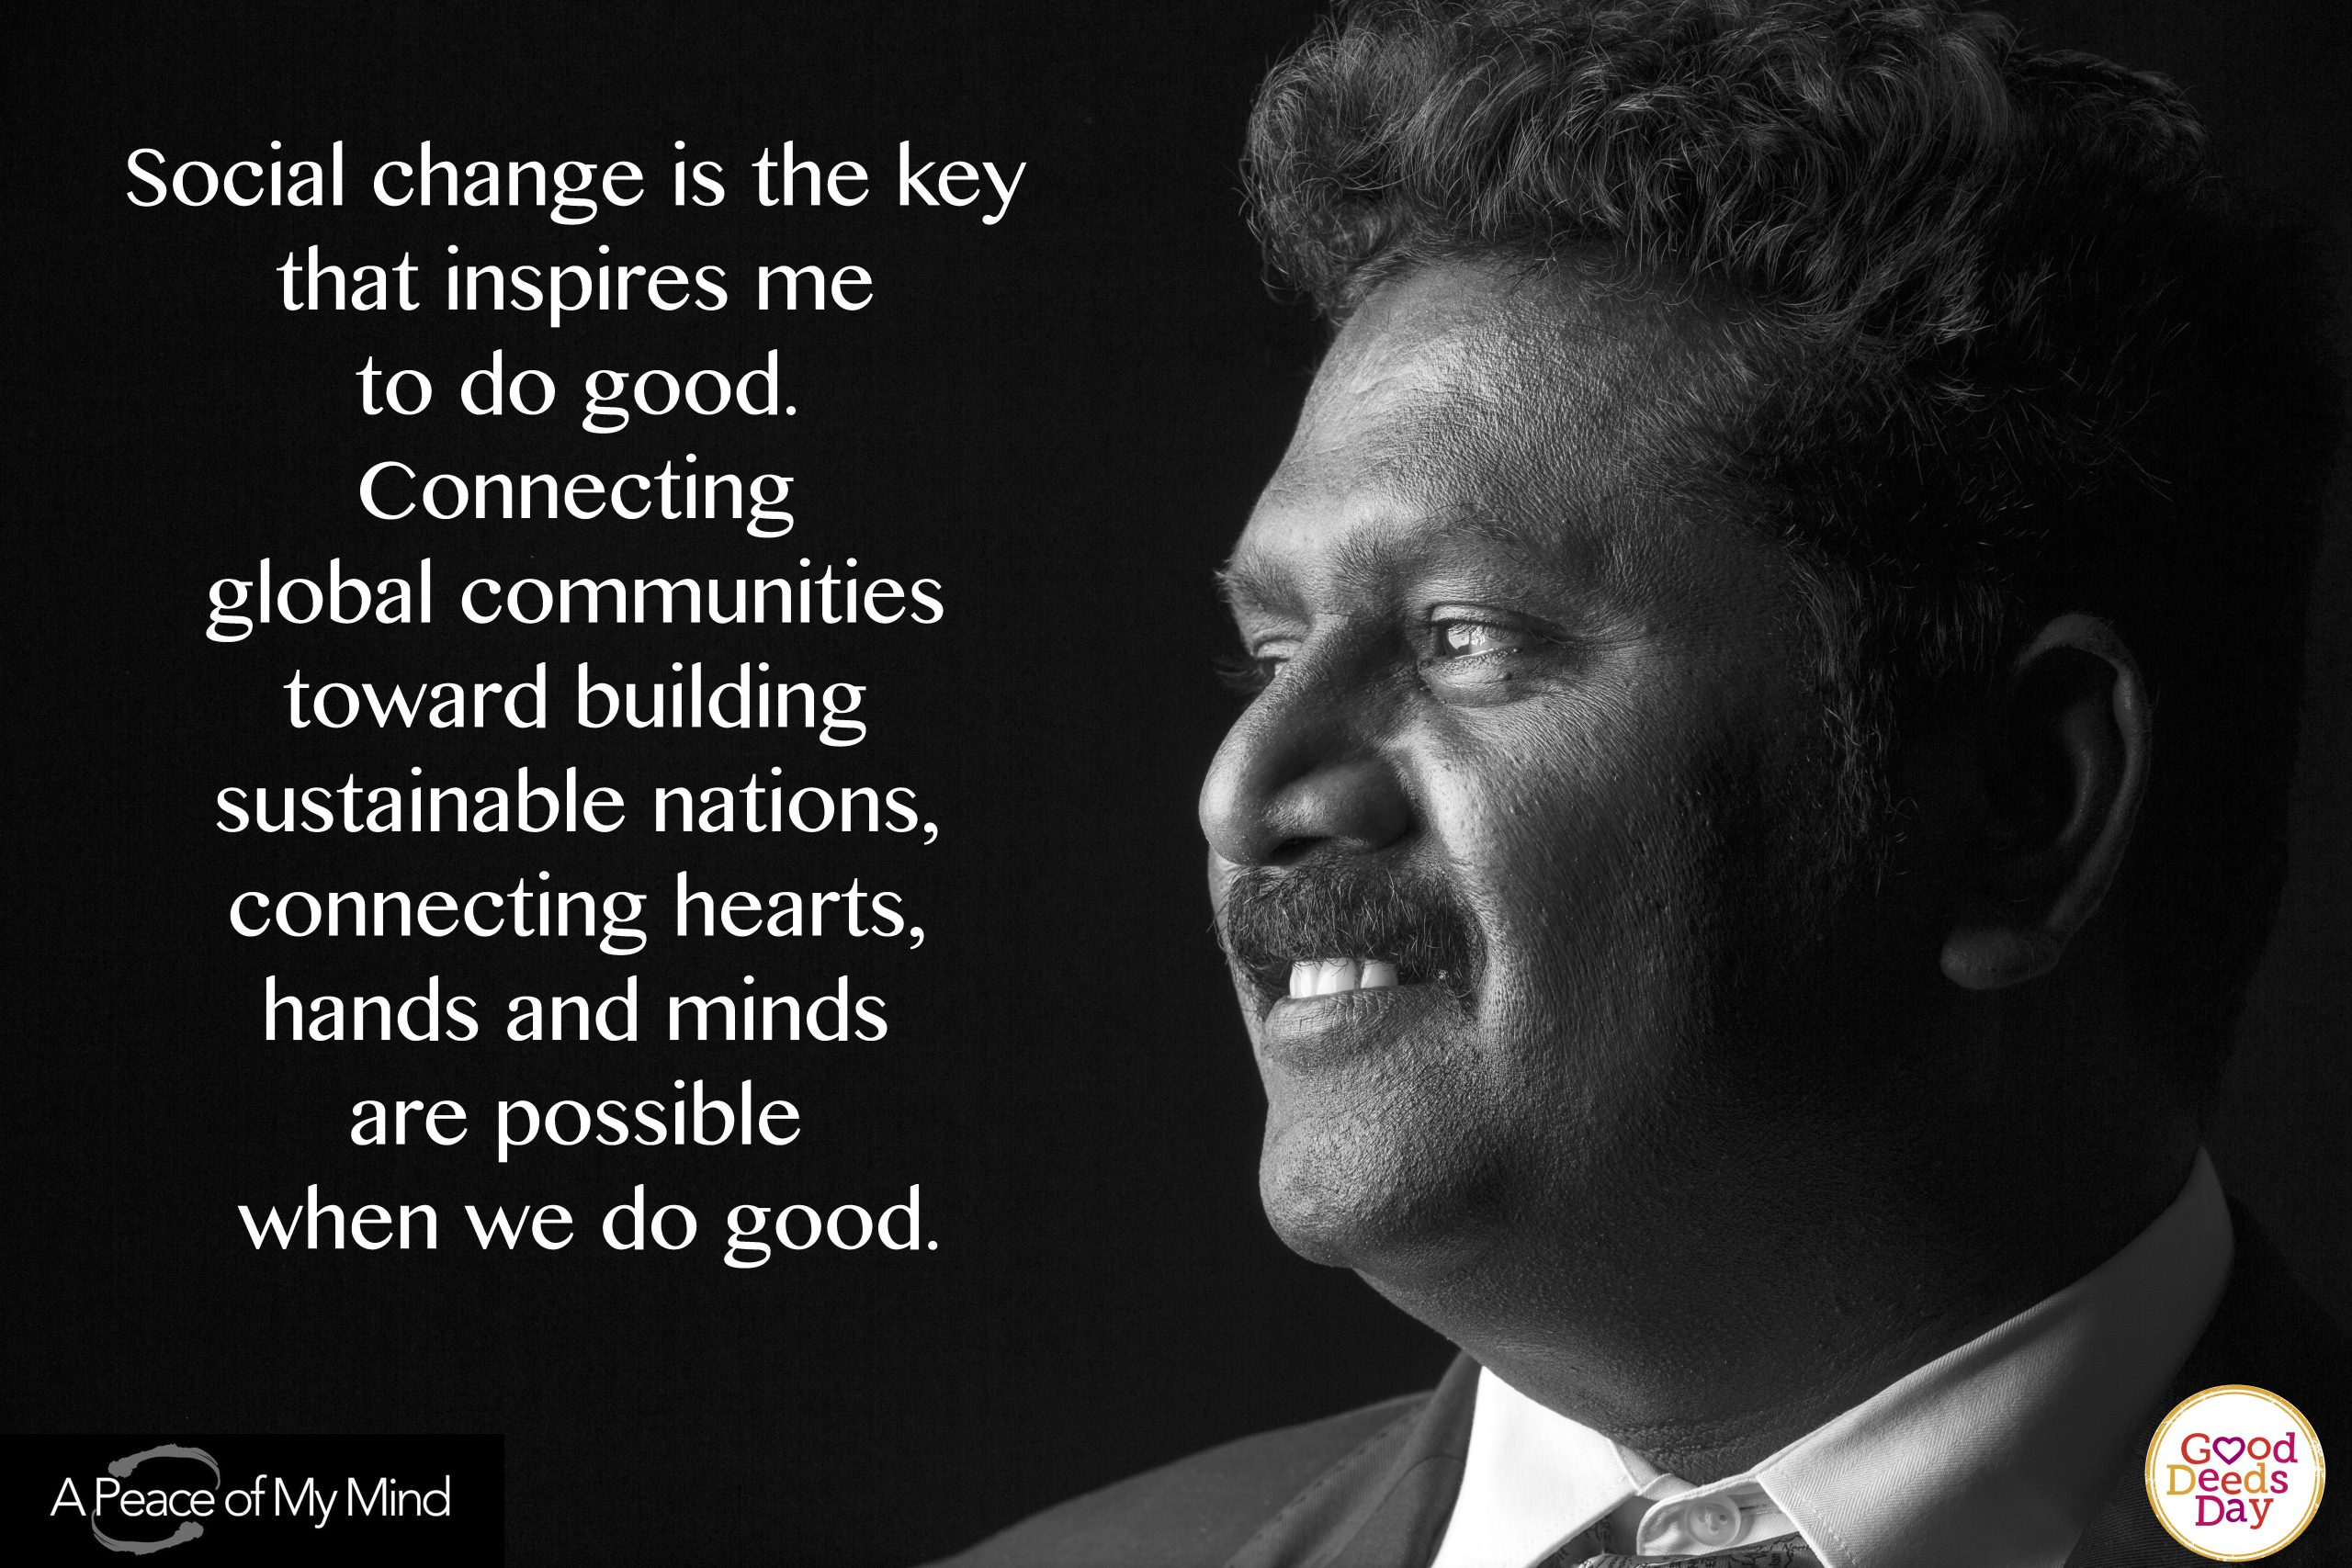 Social change is the key that inspires me to do good. Connecting global communities toward building sustainable nations, connecting hearts, hands and minds are possible when we are good.